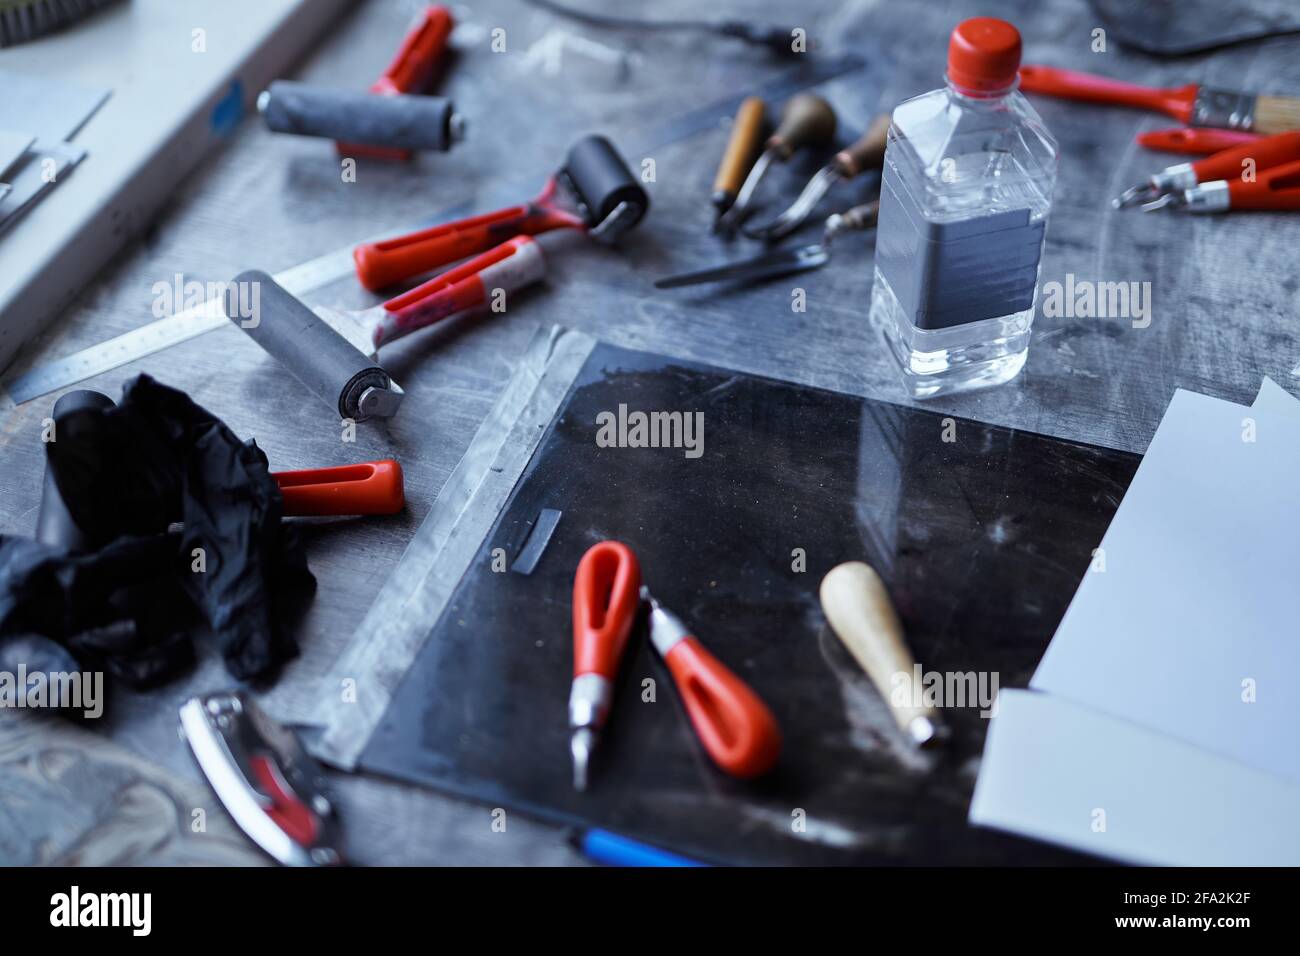 Linocut tools concept. Working tools in red and black colors on dark table  with copy space. Cutting instruments, ink roller and other tools for  linocut making. High quality photo Stock Photo 